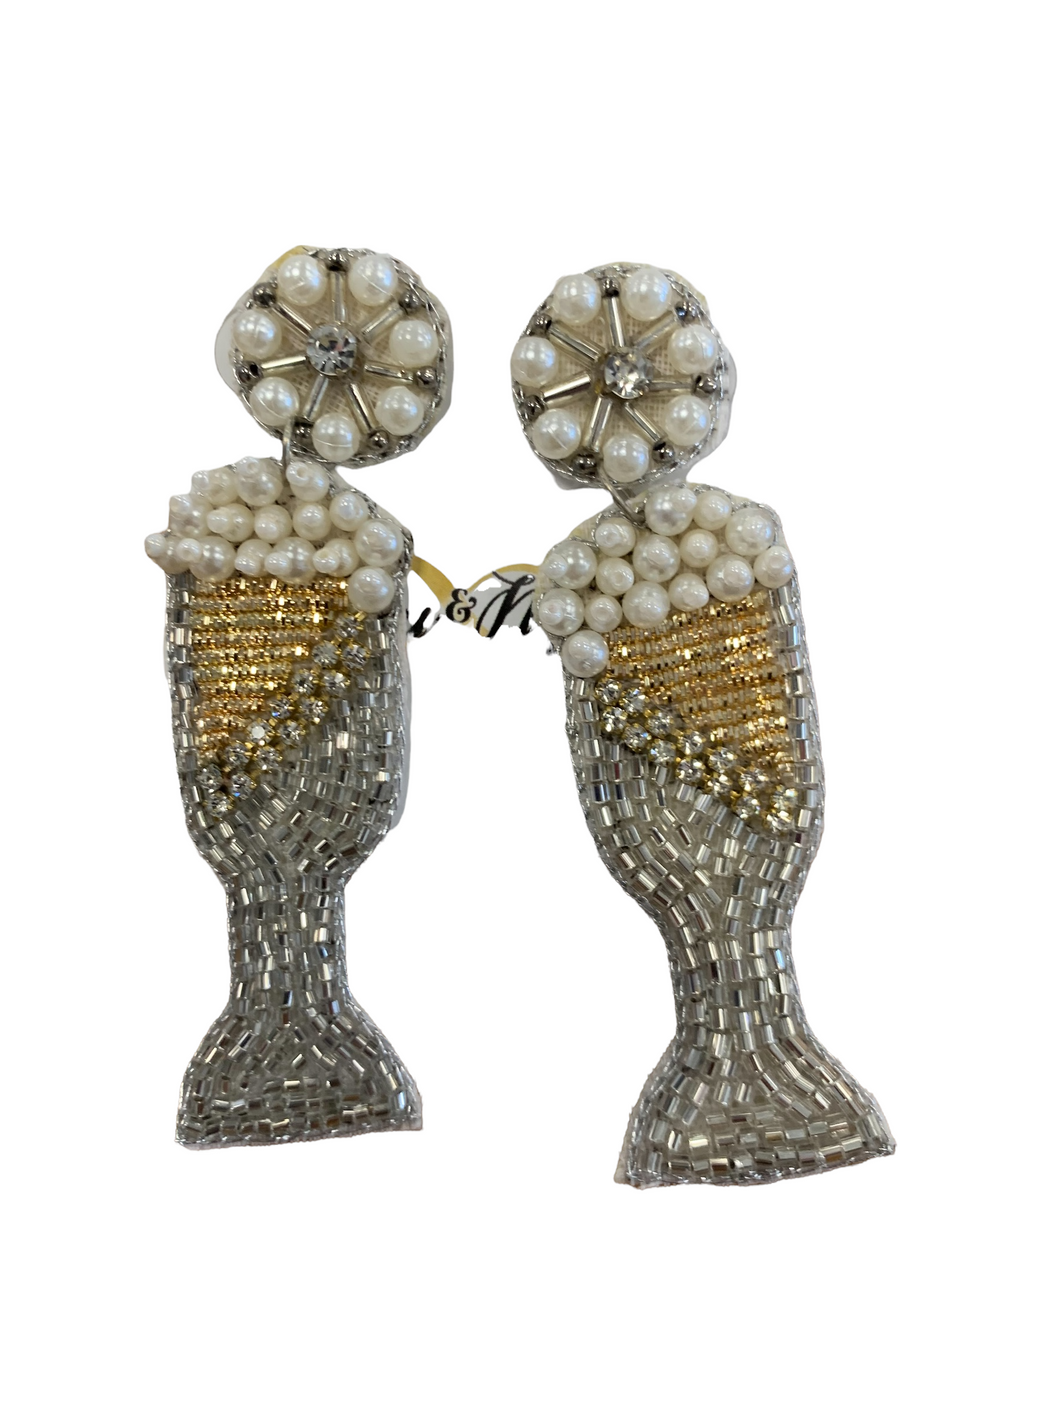 Pearl and Gold Champagne Flute Earrings